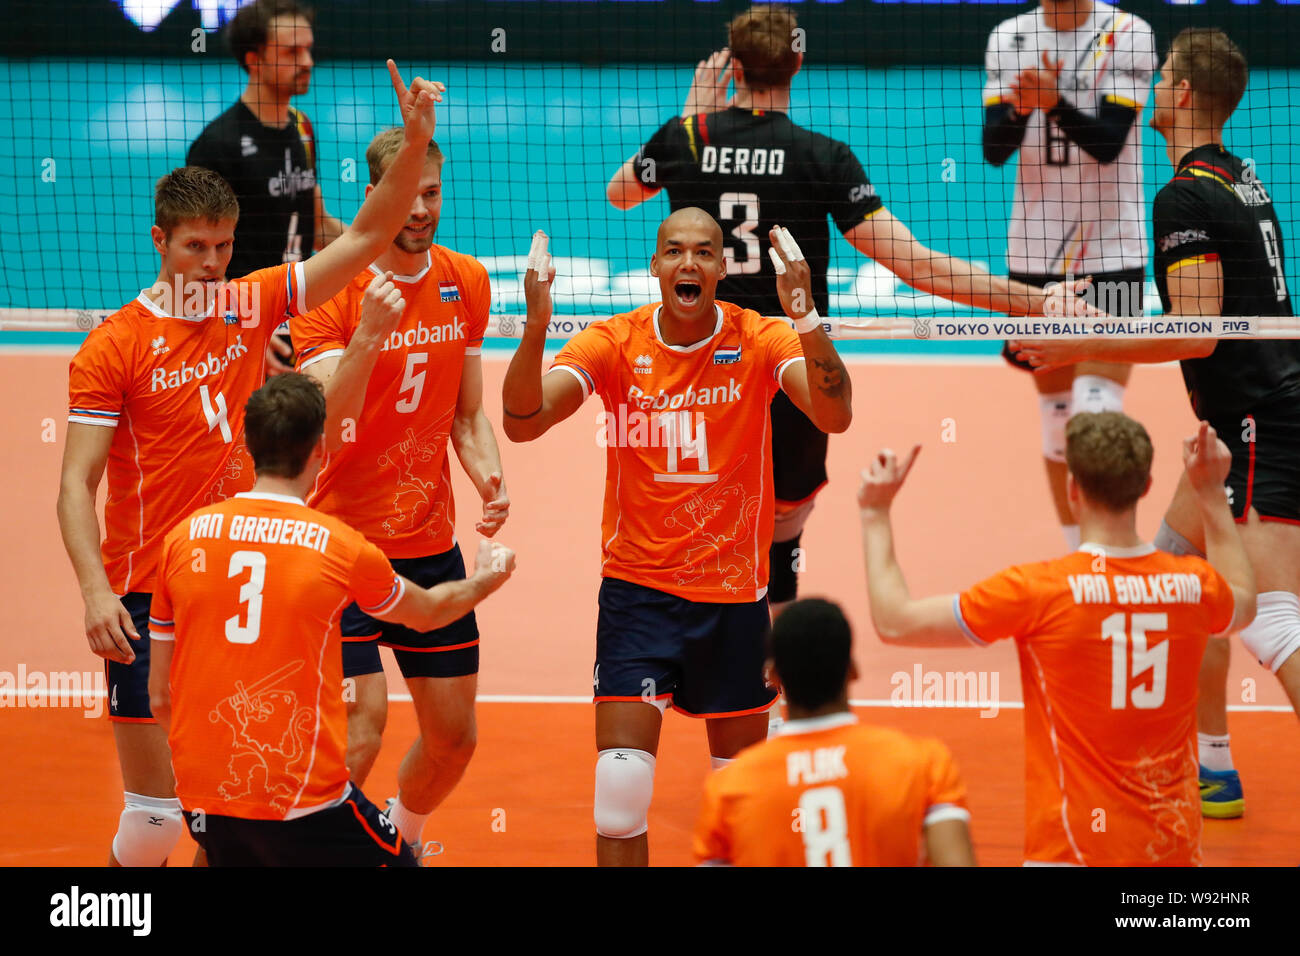 10 augustus 2019 Rotterdam, The Netherlands Tokyo 2020 Volleybal Olympic Qualification Tournament  10-08-2019: Volleybal: OKT Belgie v Nederland: Rotterdam Volleybal OKT Tokyo 2020 Men Rotterdam - Ahoy  L-R Thijs Ter Horst (4) of The Netherlands, Luuc van der Ent (5) of The Netherlands, Maarten van Garderen (3) of The Netherlands, Nimir Abdel - Aziz (14) of The Netherlands, Fabian Plak (8) of The Netherlands, Gijs van Solkema (15) of The Netherlands Stock Photo